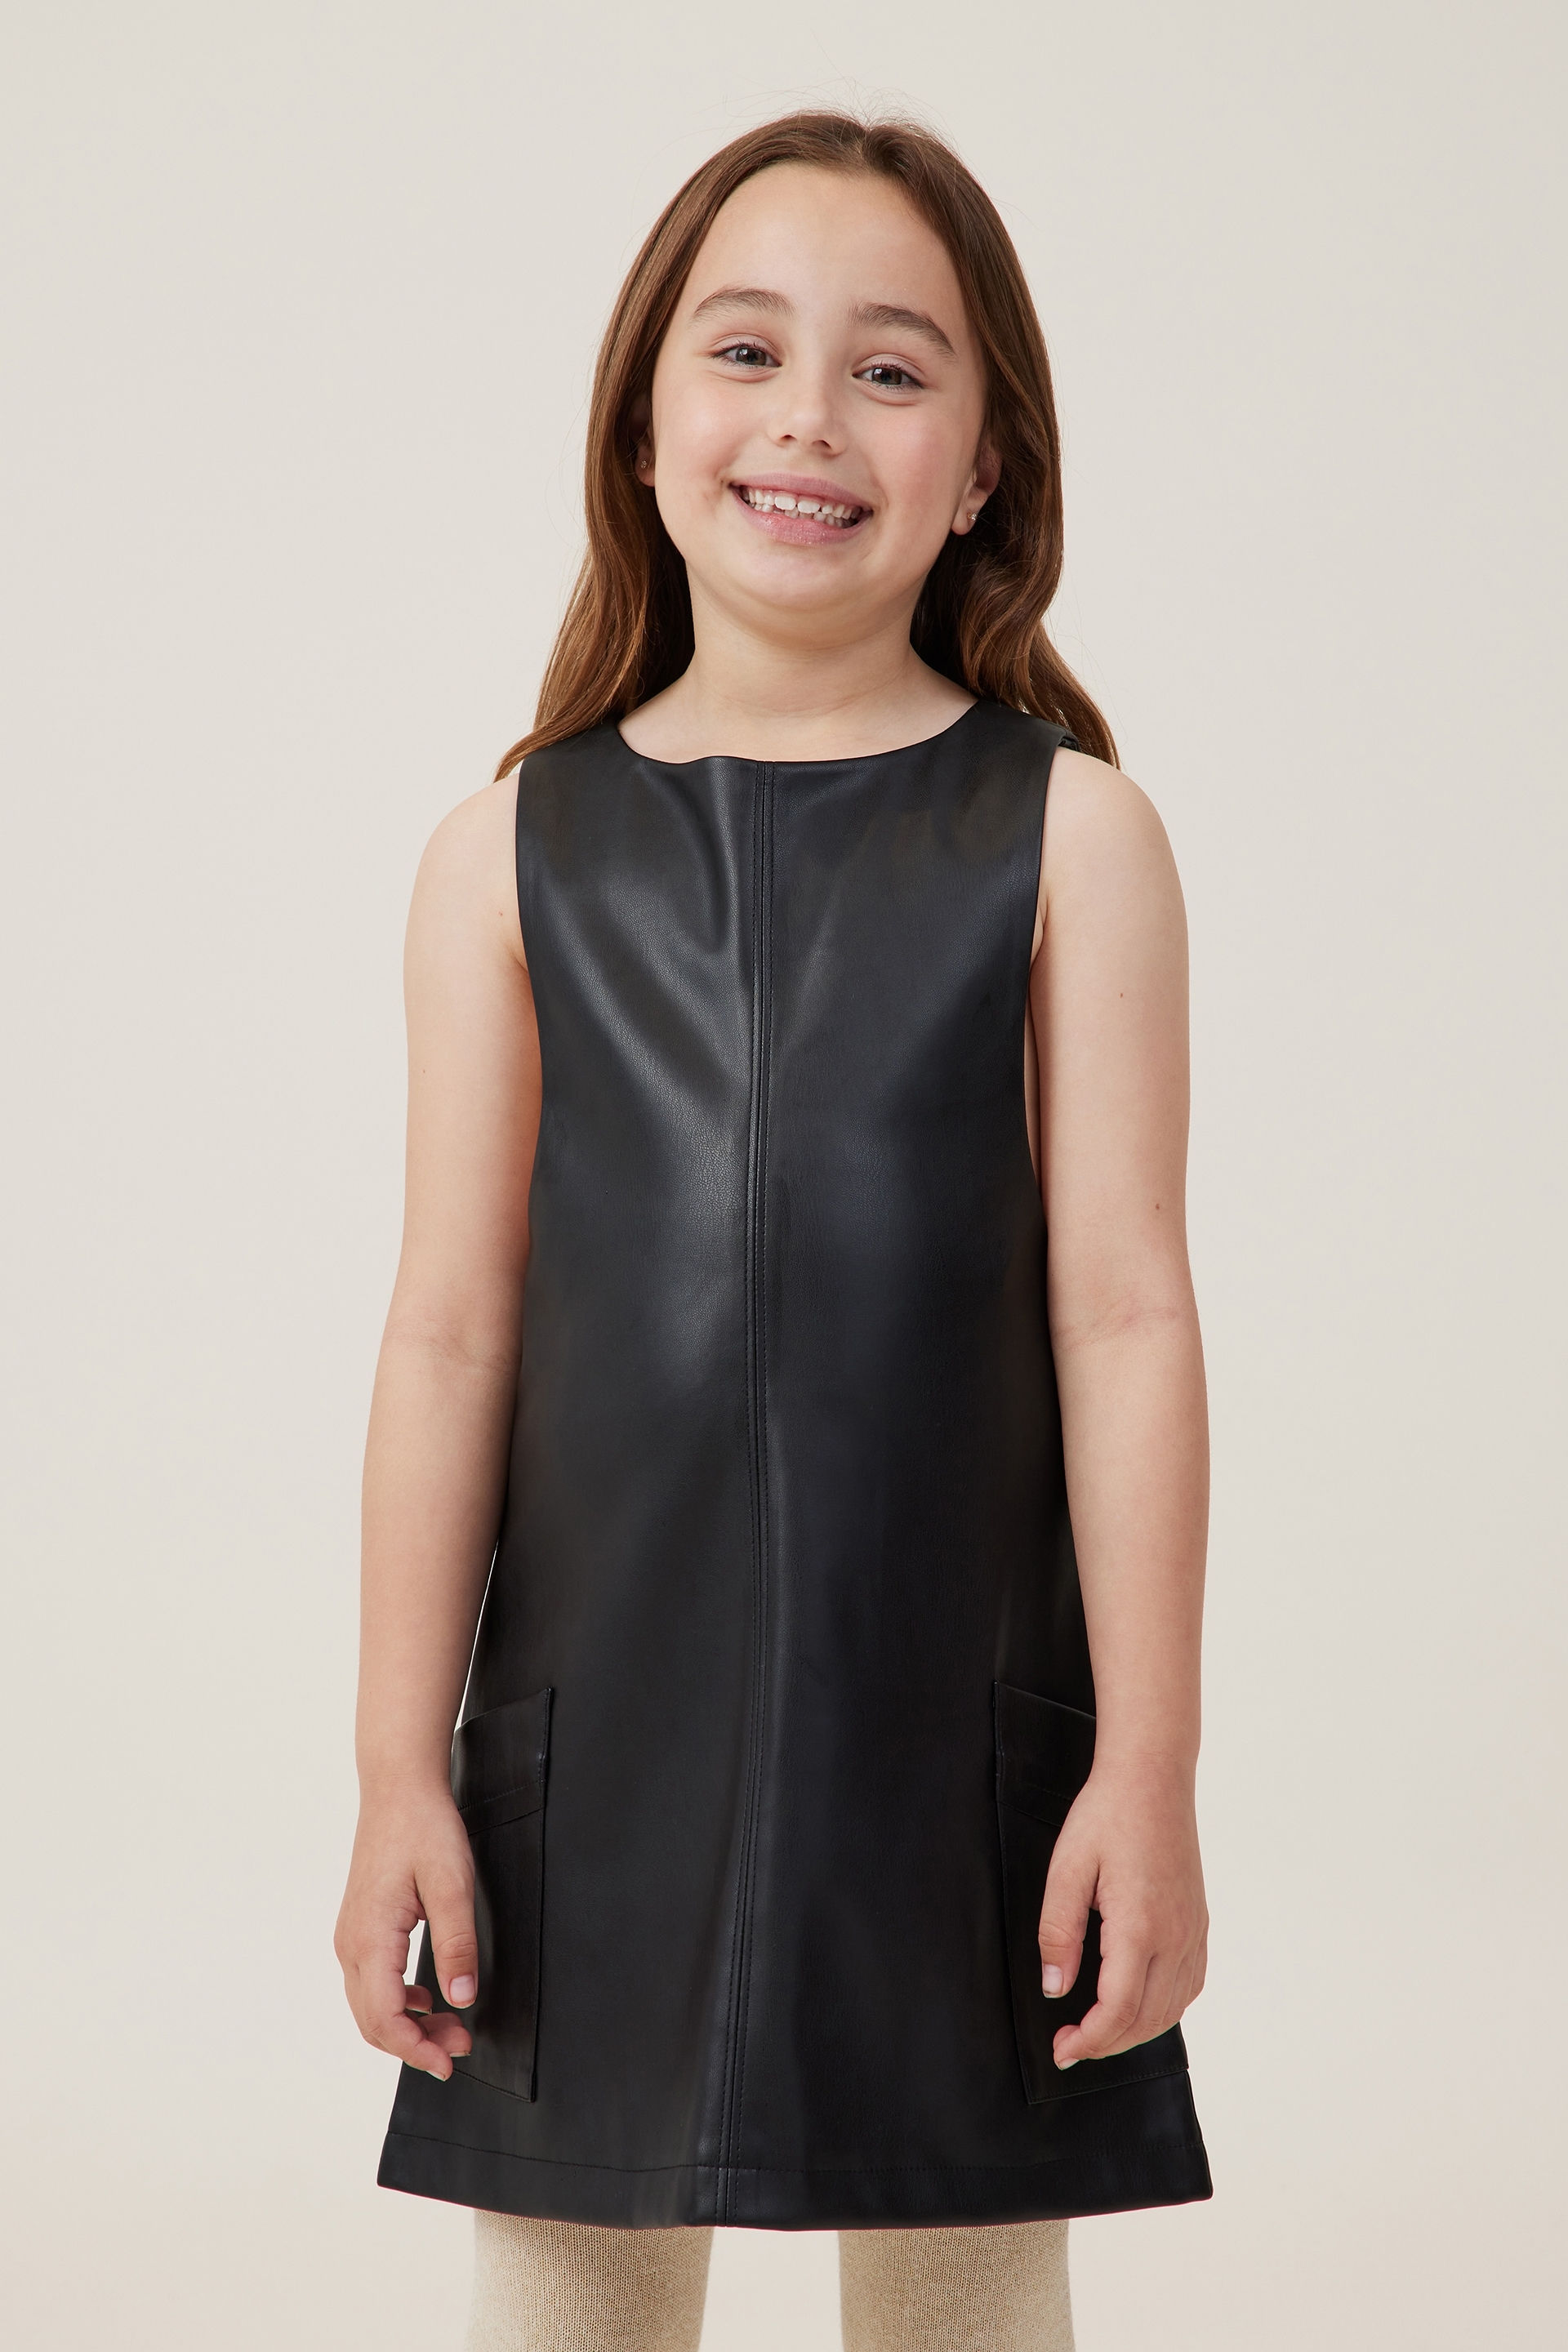 Penny Vegan Leather Pinafore